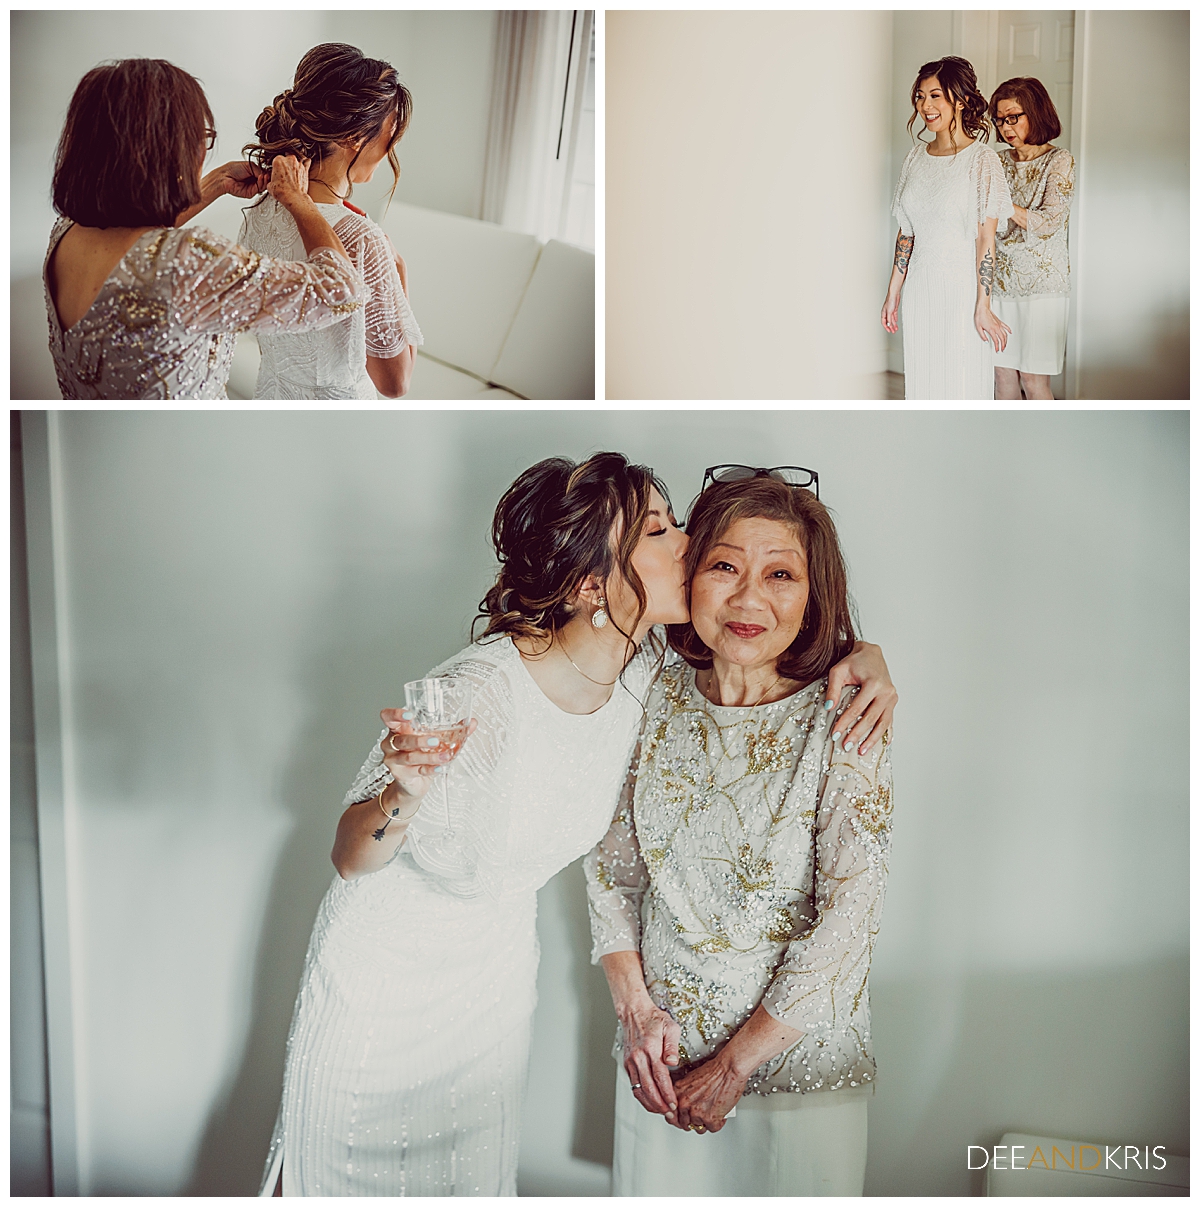 Three images: top left image of mother of bride helping put bride's necklace on. Top right image of mother of bride zipping bride into gown. Bottom image of bride kissing her mother's cheek while mother looks at camera with a smile.